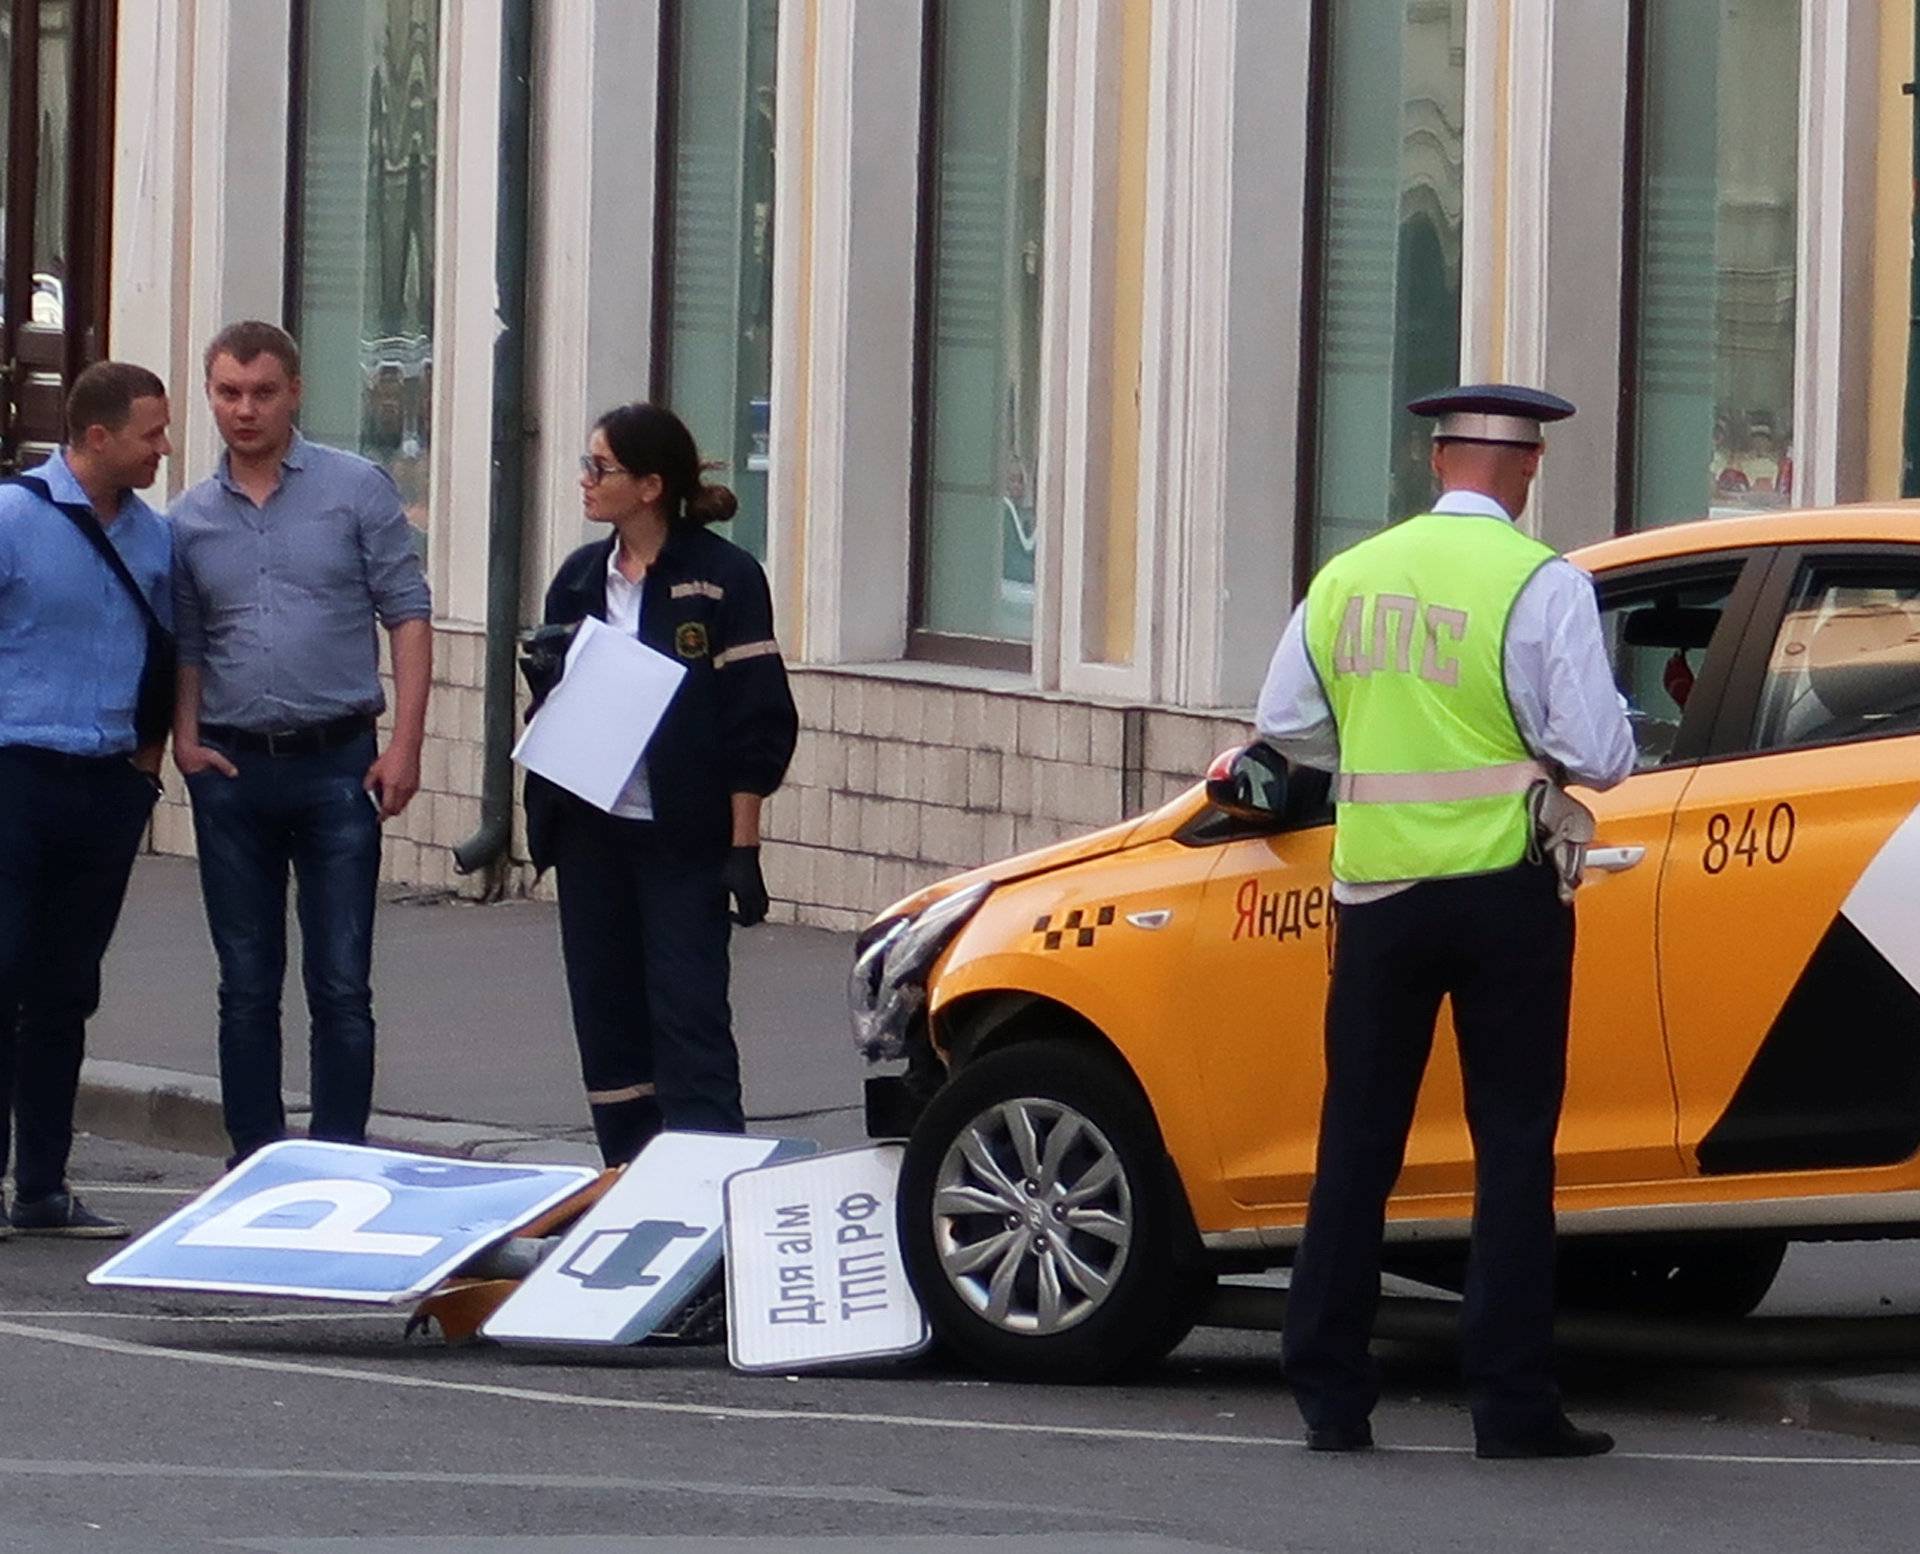 A view shows a damaged taxi, which ran into a crowd of people, in central Moscow